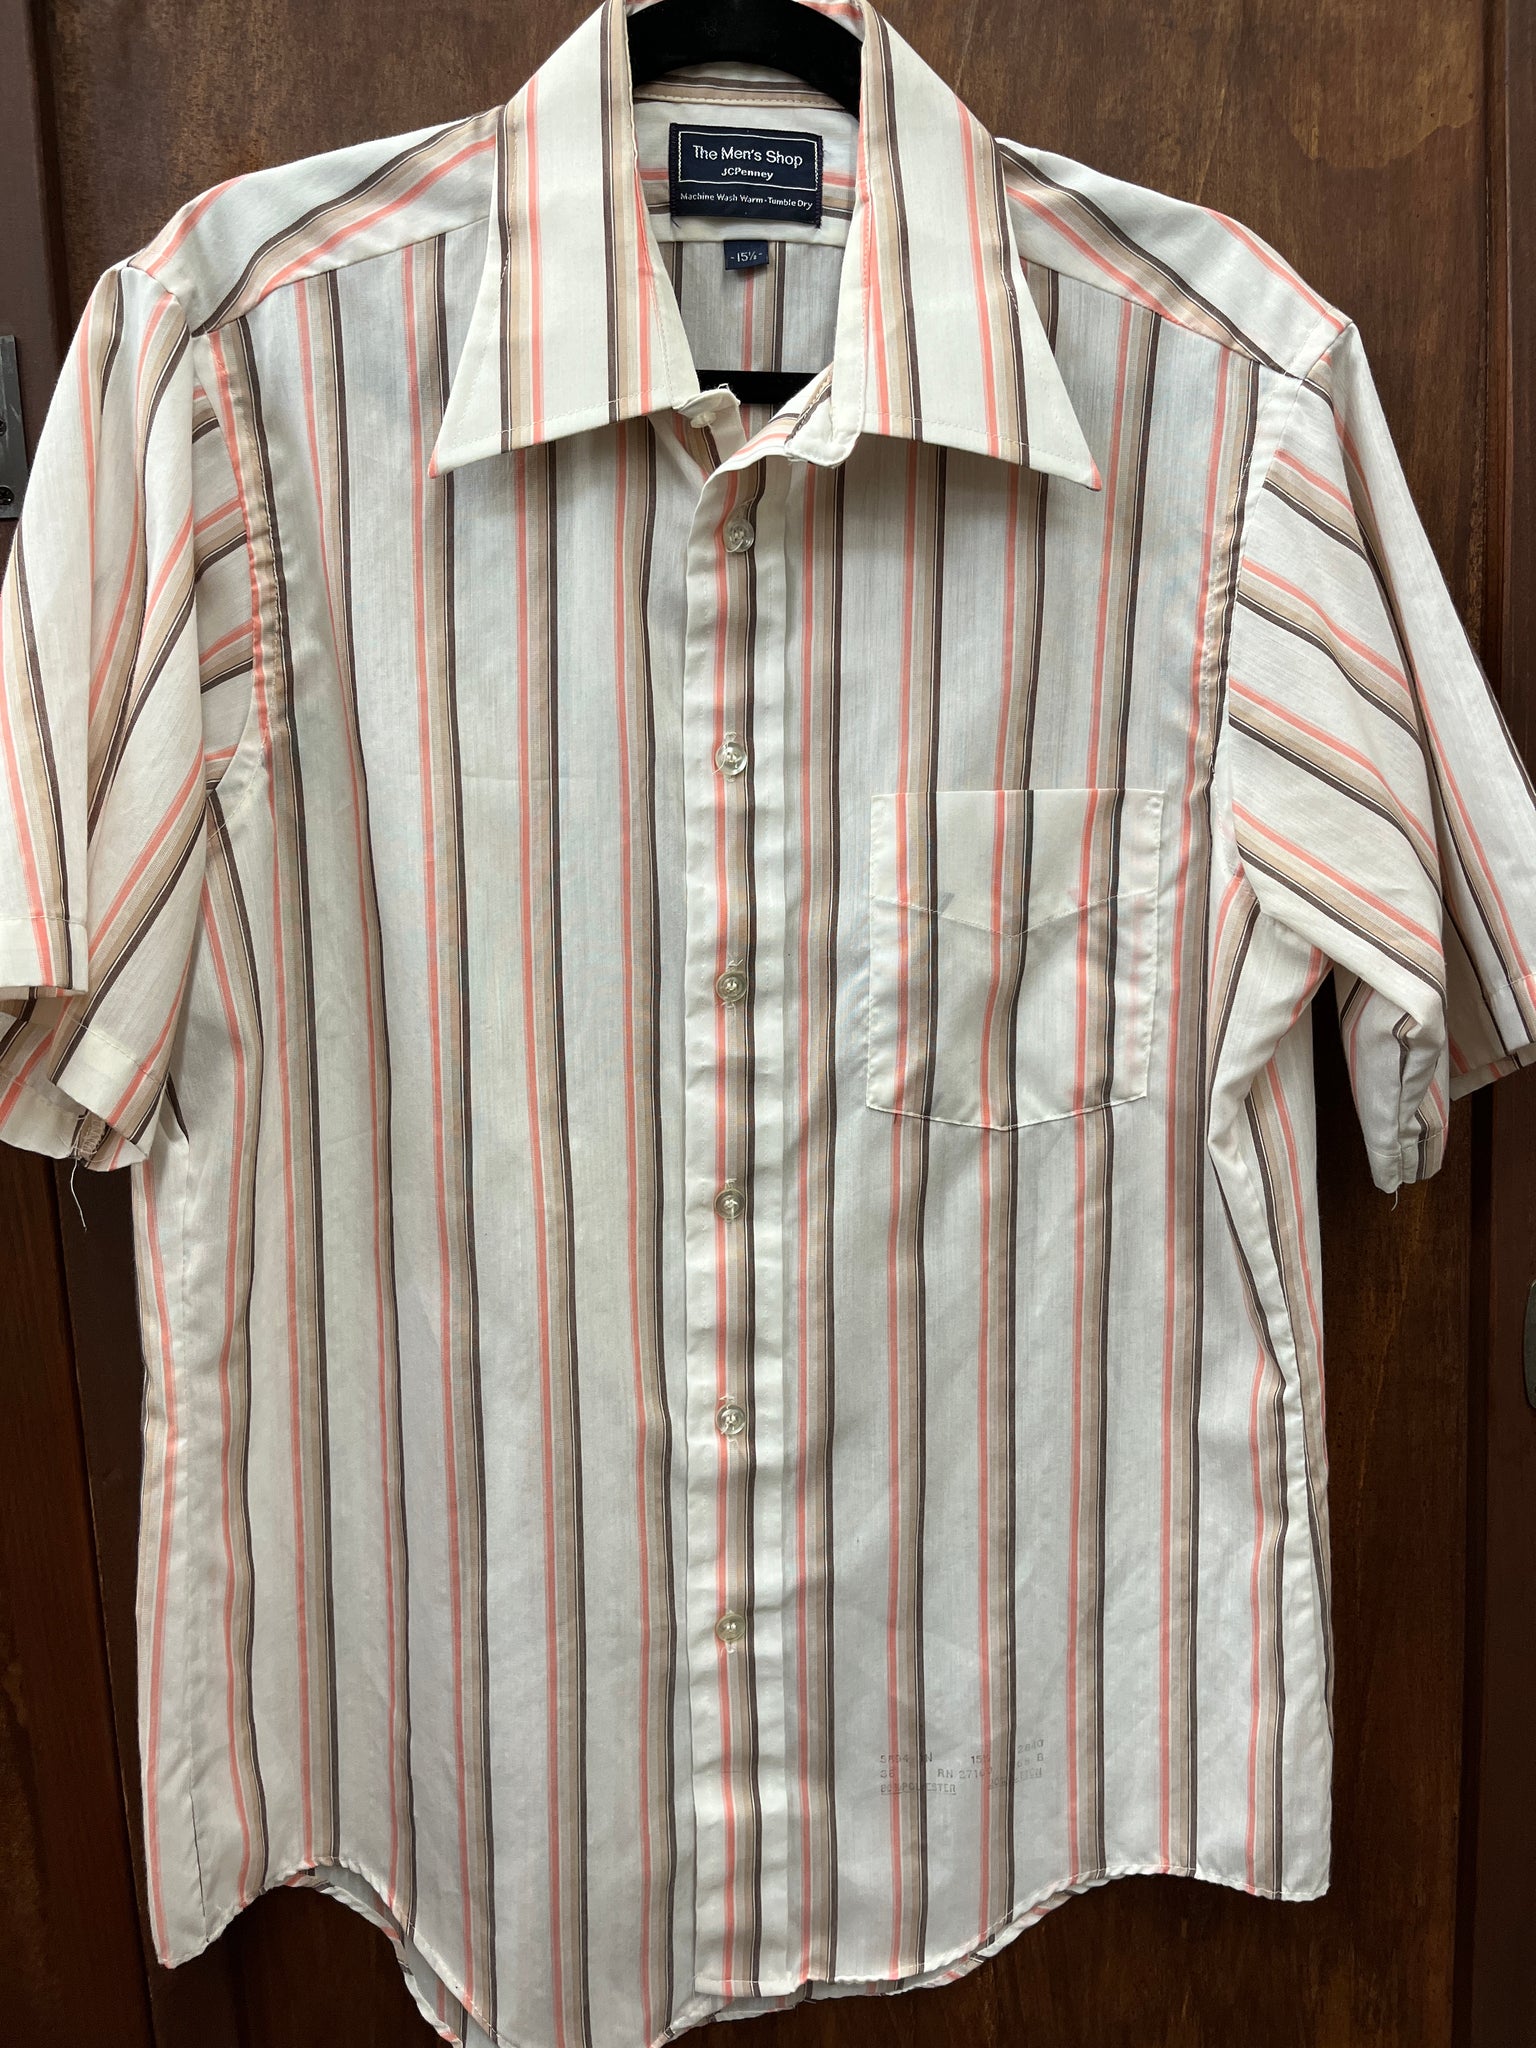 1960s MENS TOP- The Mens Shop JC PENNEY cream striped s/s